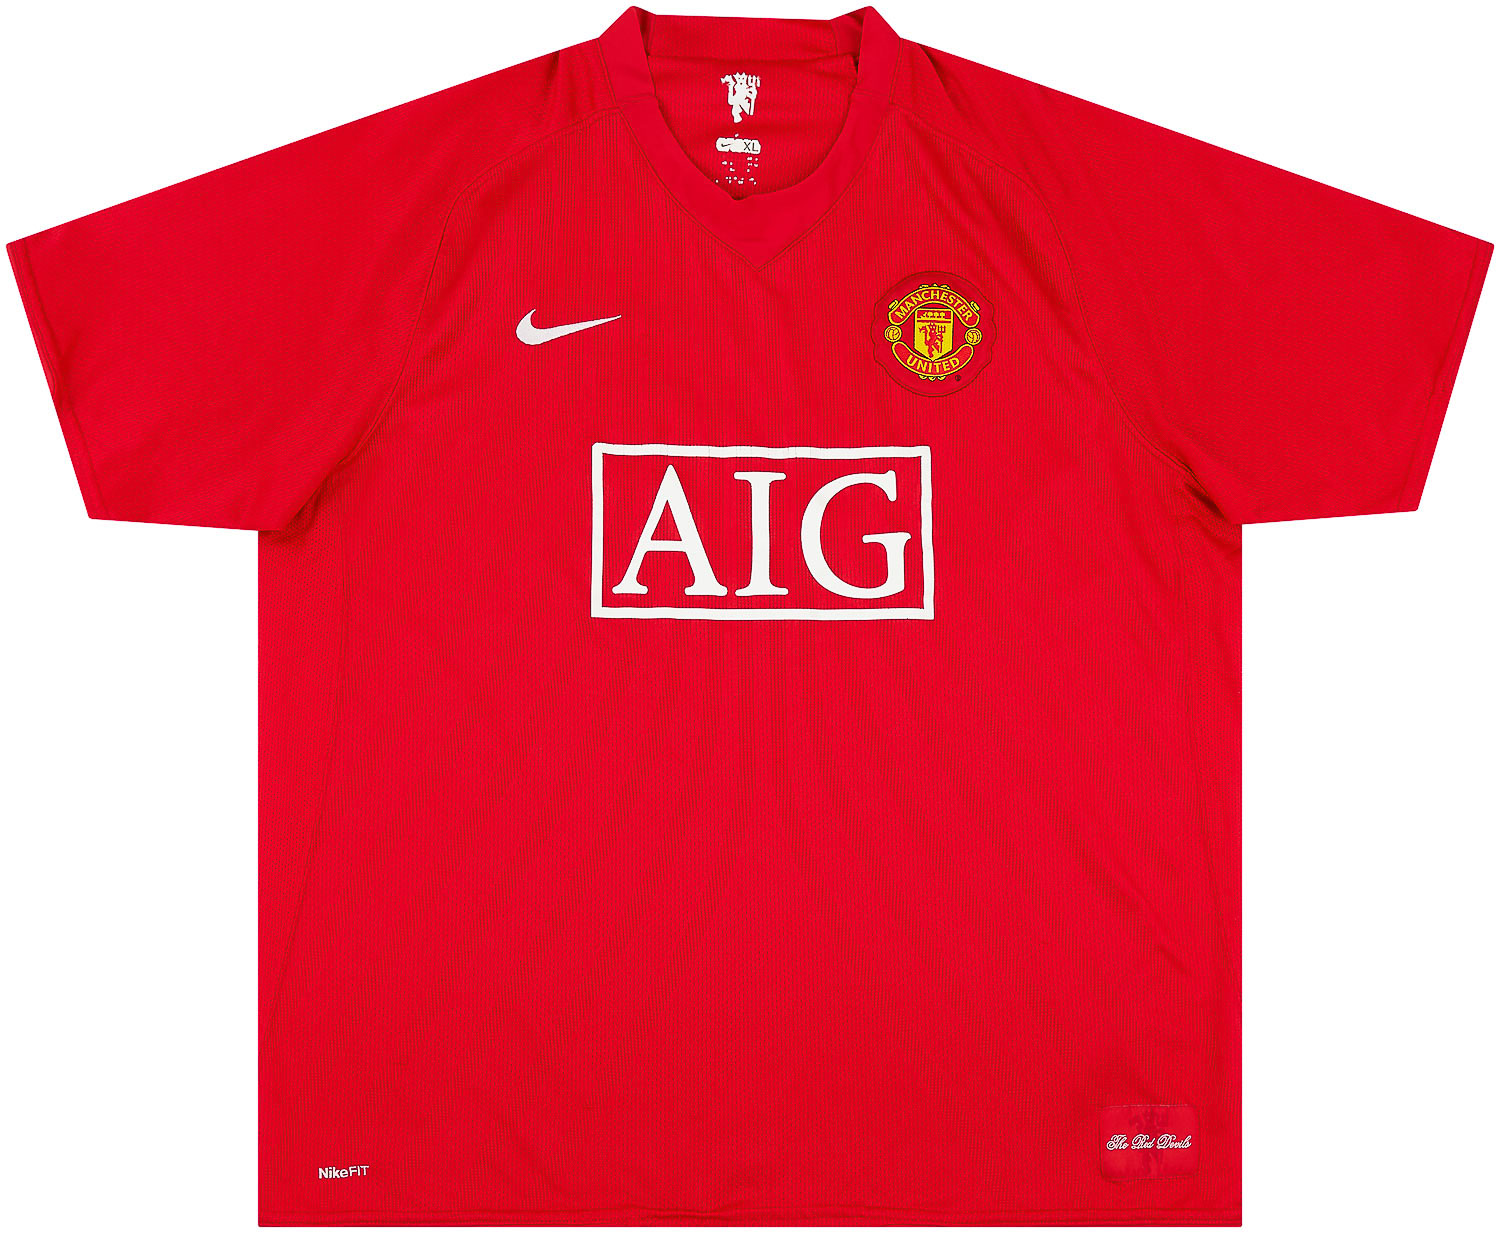 2007-09 Manchester United Home Shirt